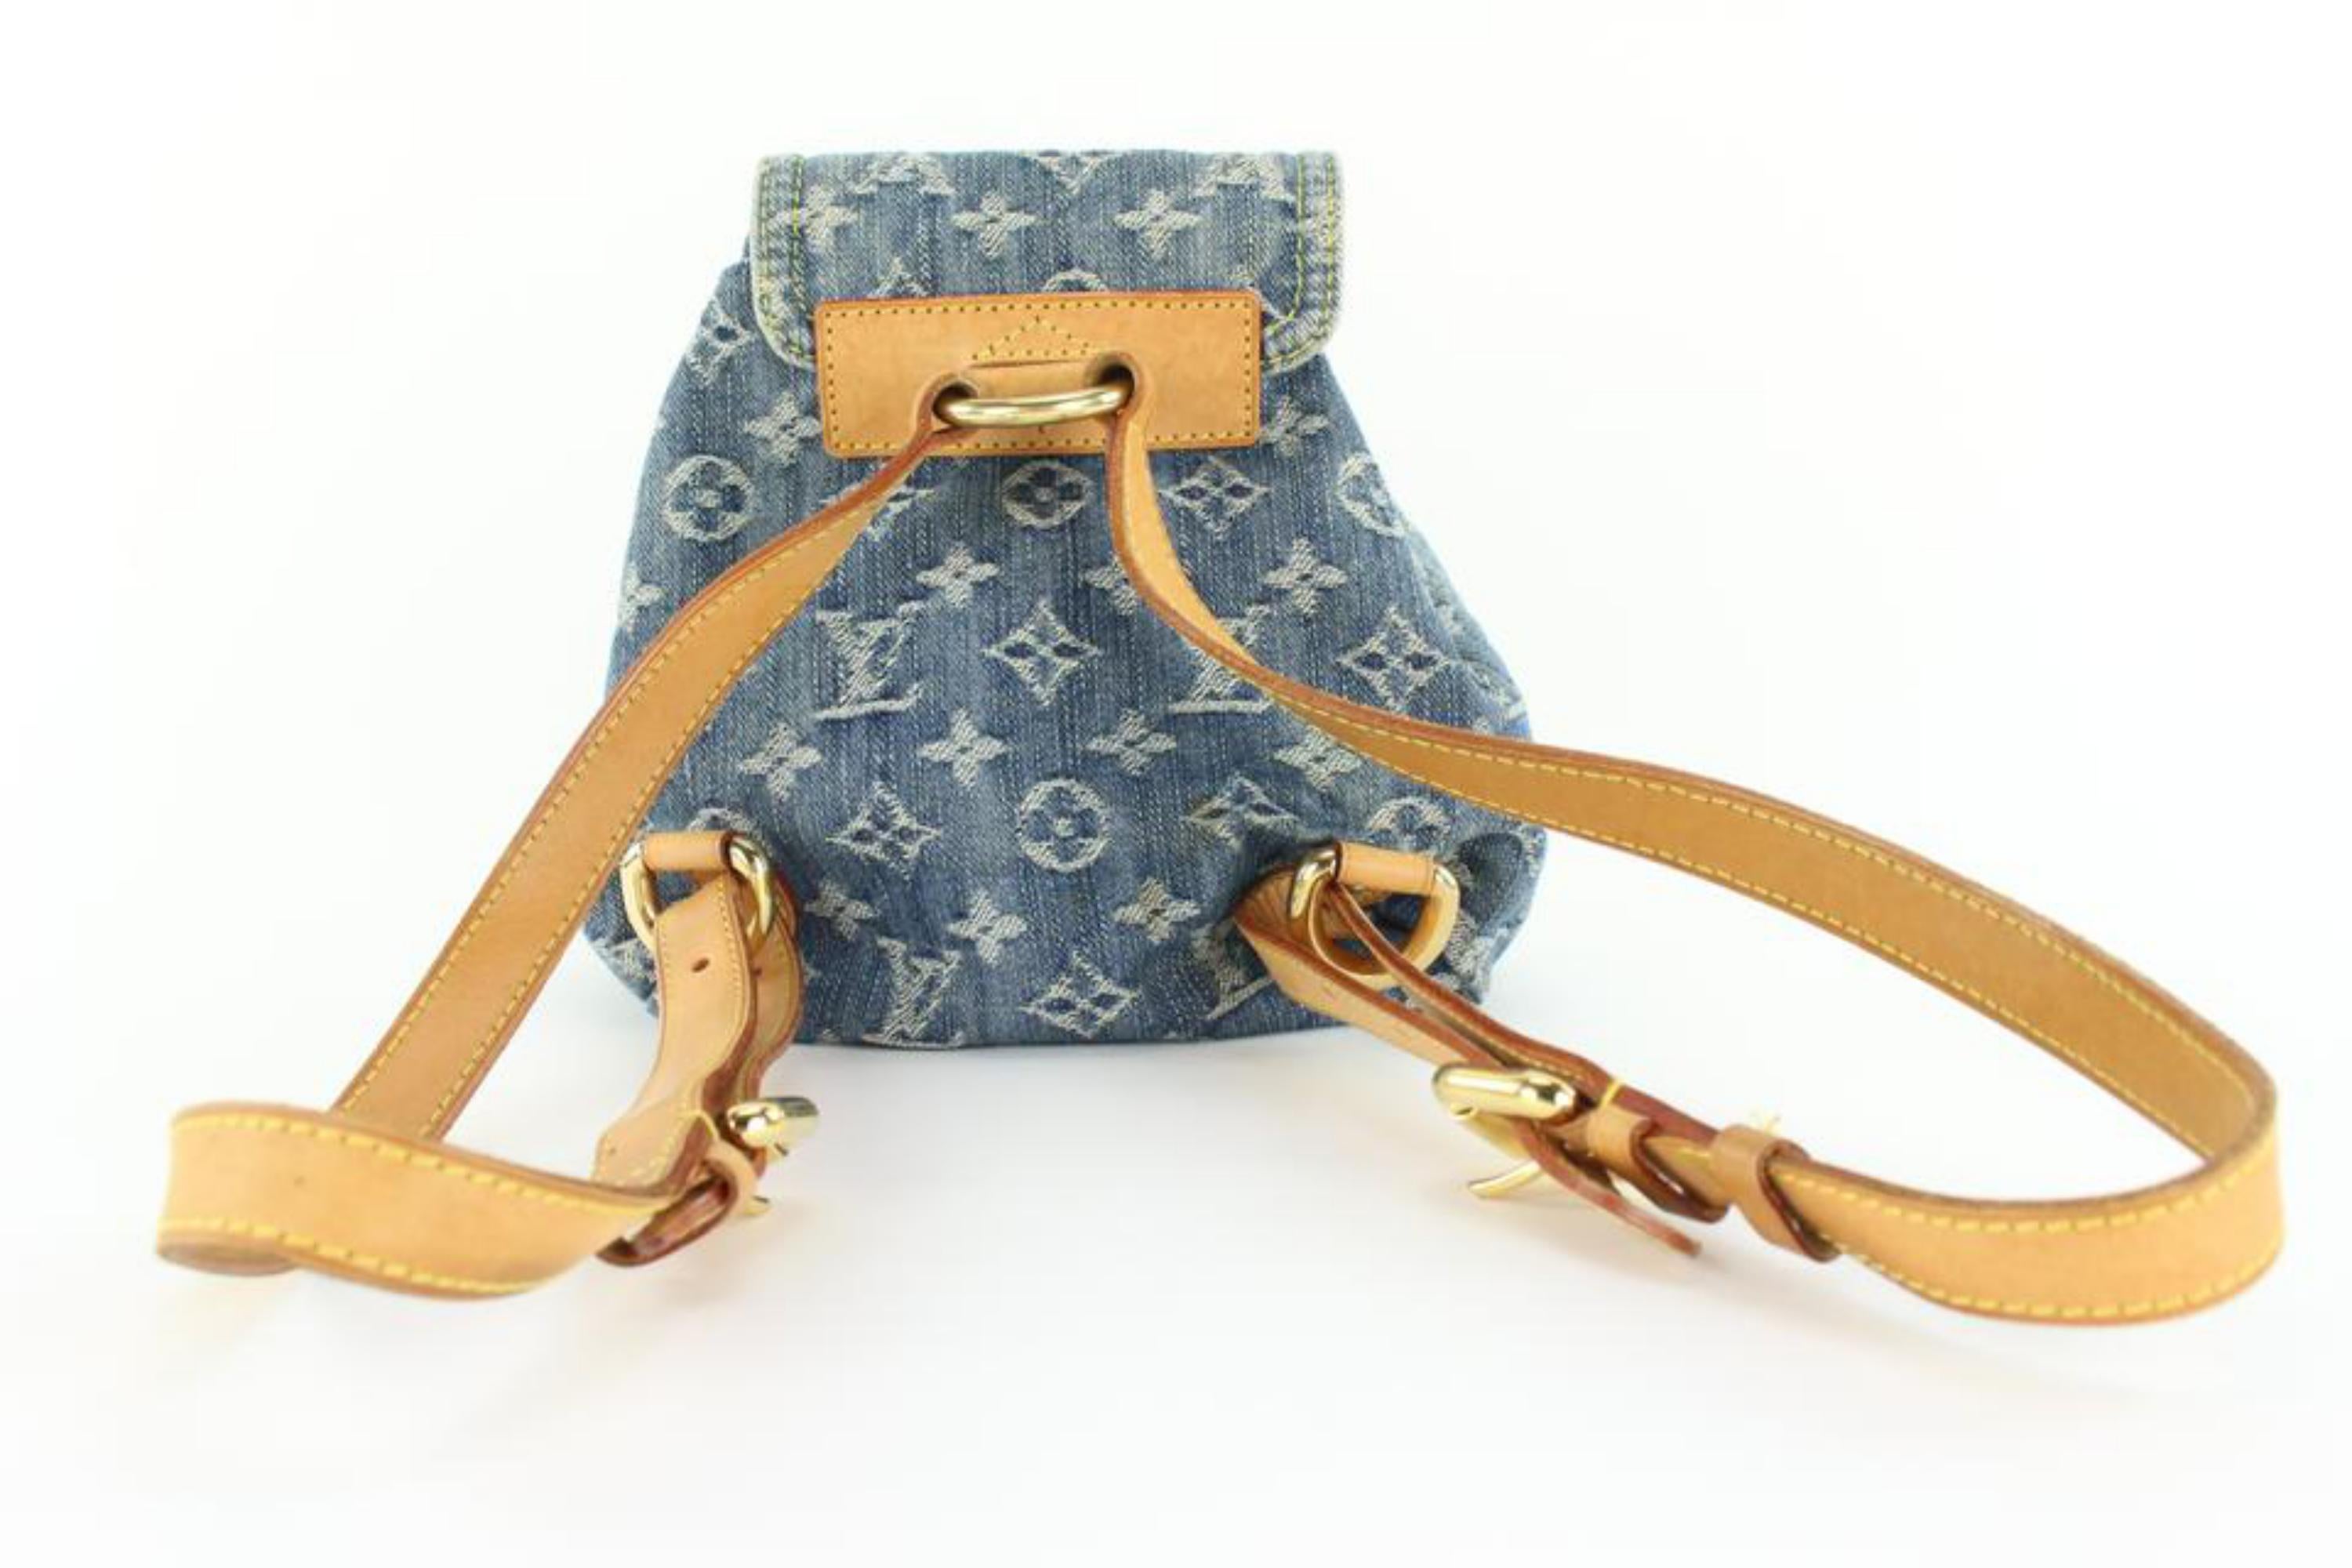 Louis Vuitton Monogram Denim Mini Backpack Sac a Dos PM 6LVJ1020 In Good Condition For Sale In Dix hills, NY